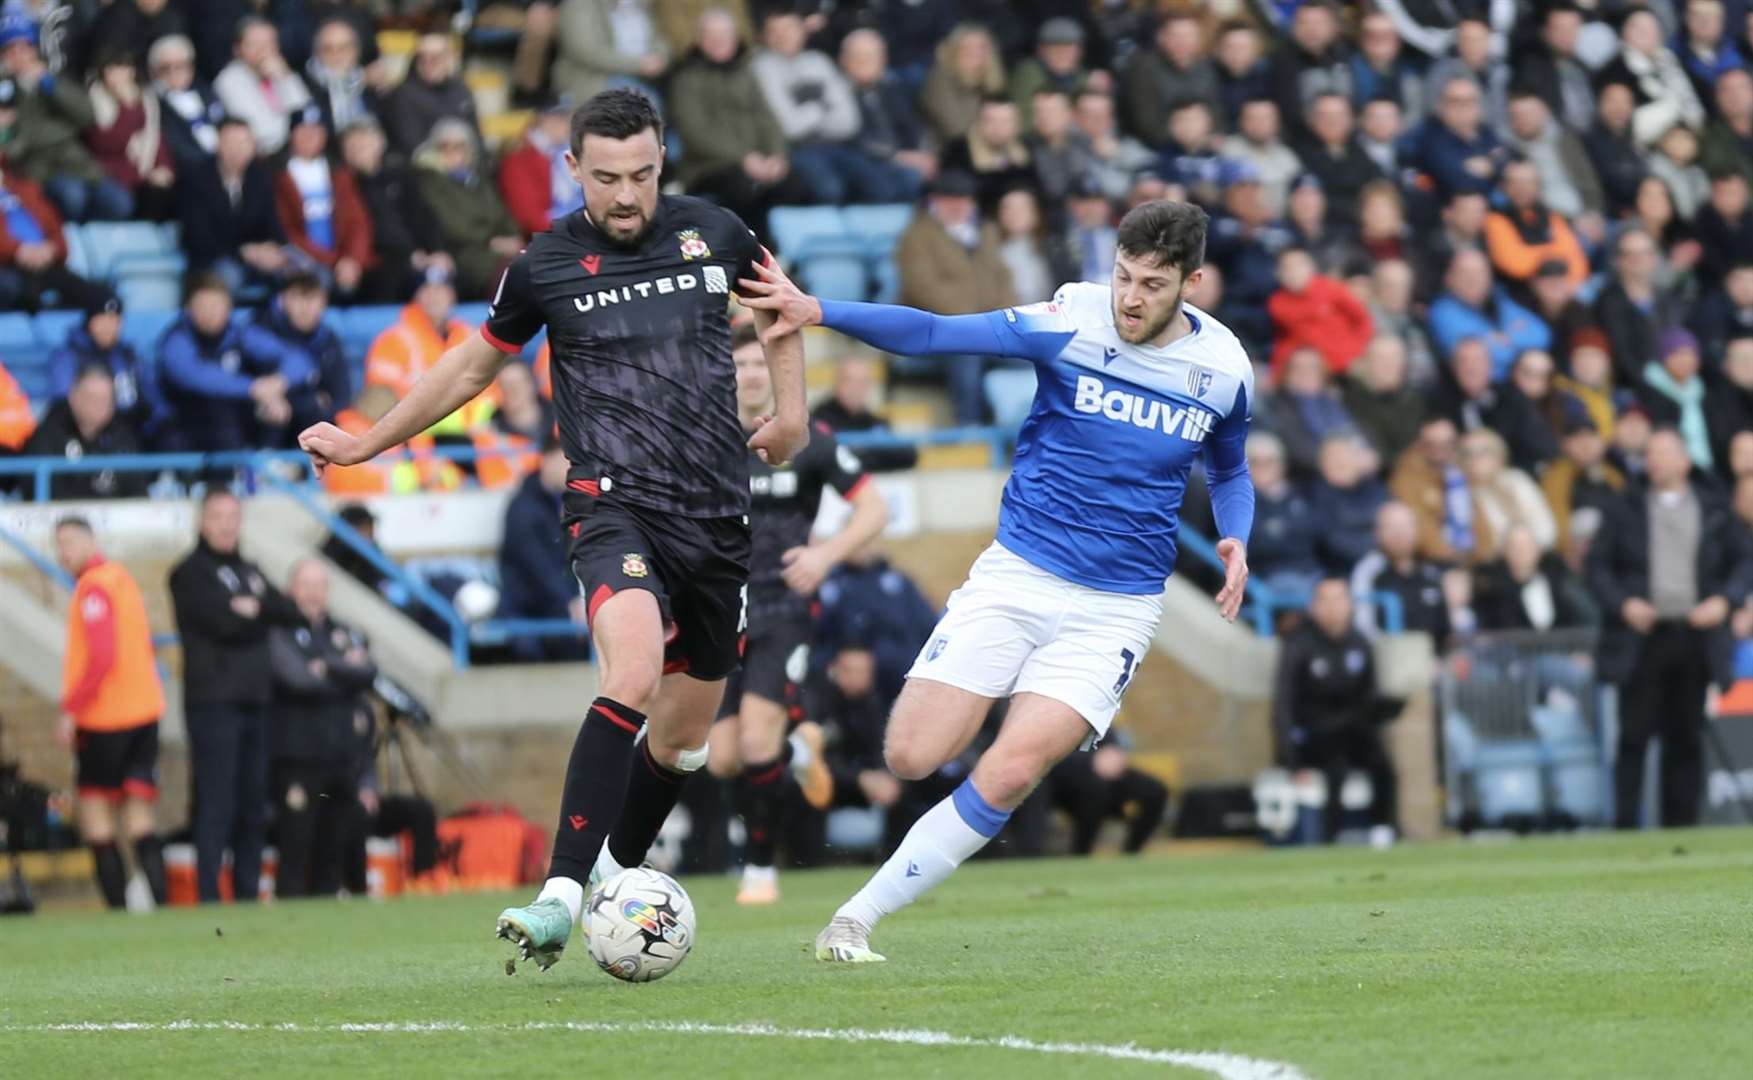 Ashley Nadesan challenges for the ball in the first half as Gillingham play Wrexham Picture: @Julian_KPI